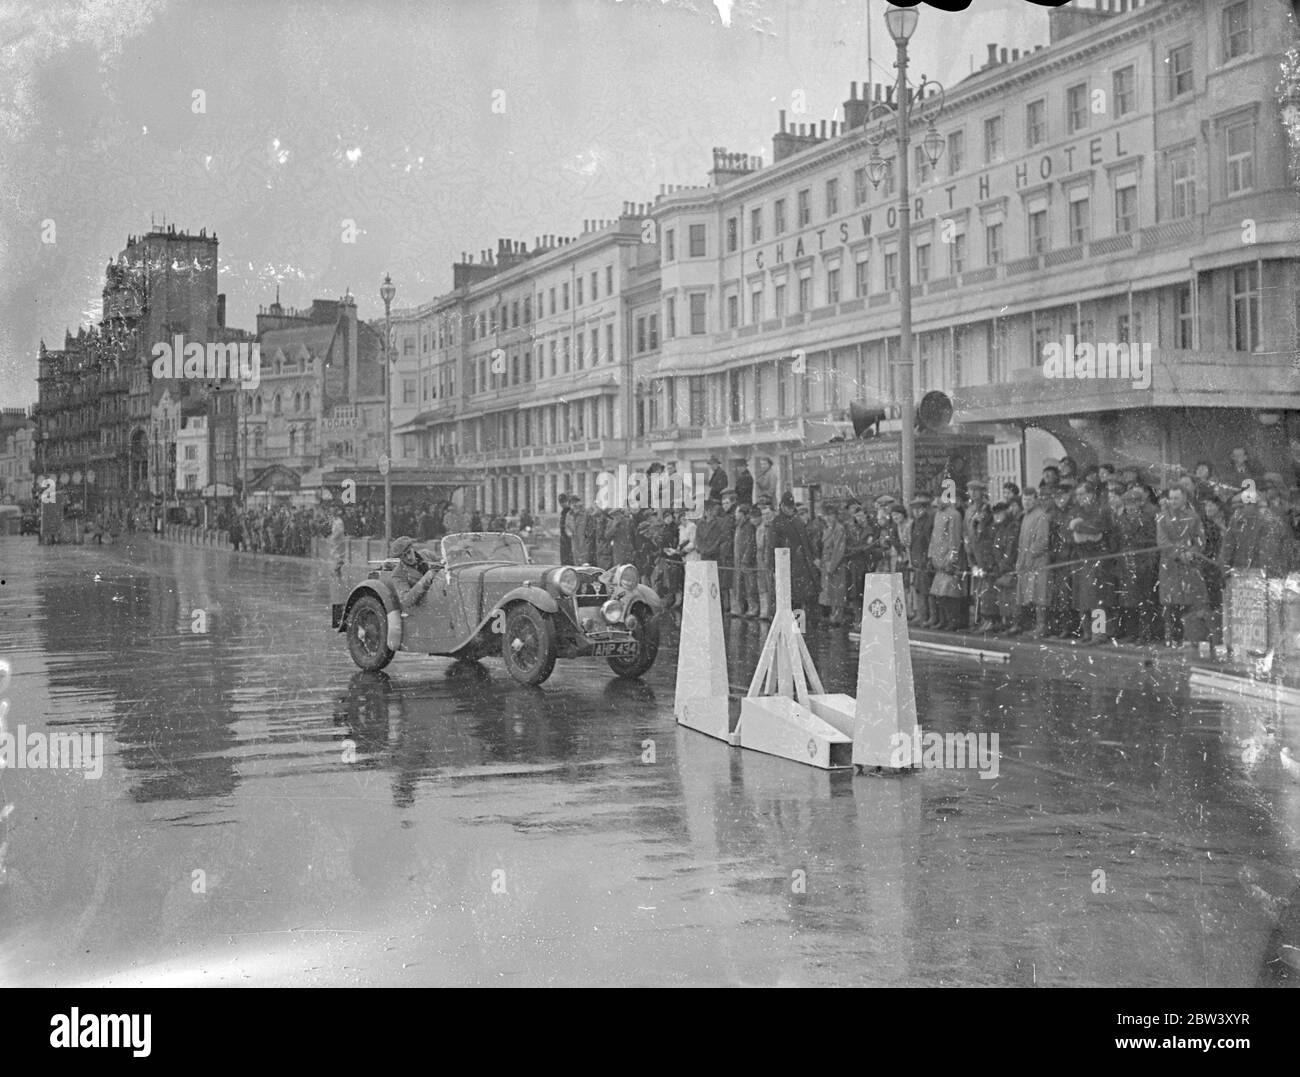 Rough weather greets RAC Rally Competitors at Hastings . After spending two days and nights on a gruelling thousand miles course competitors in the RAC , Rally arrived at Hastings , the finishing point . Photo shows , speed and reversing tests in progress on the sea swept promenade at Hastings . 11 March 1937 Stock Photo